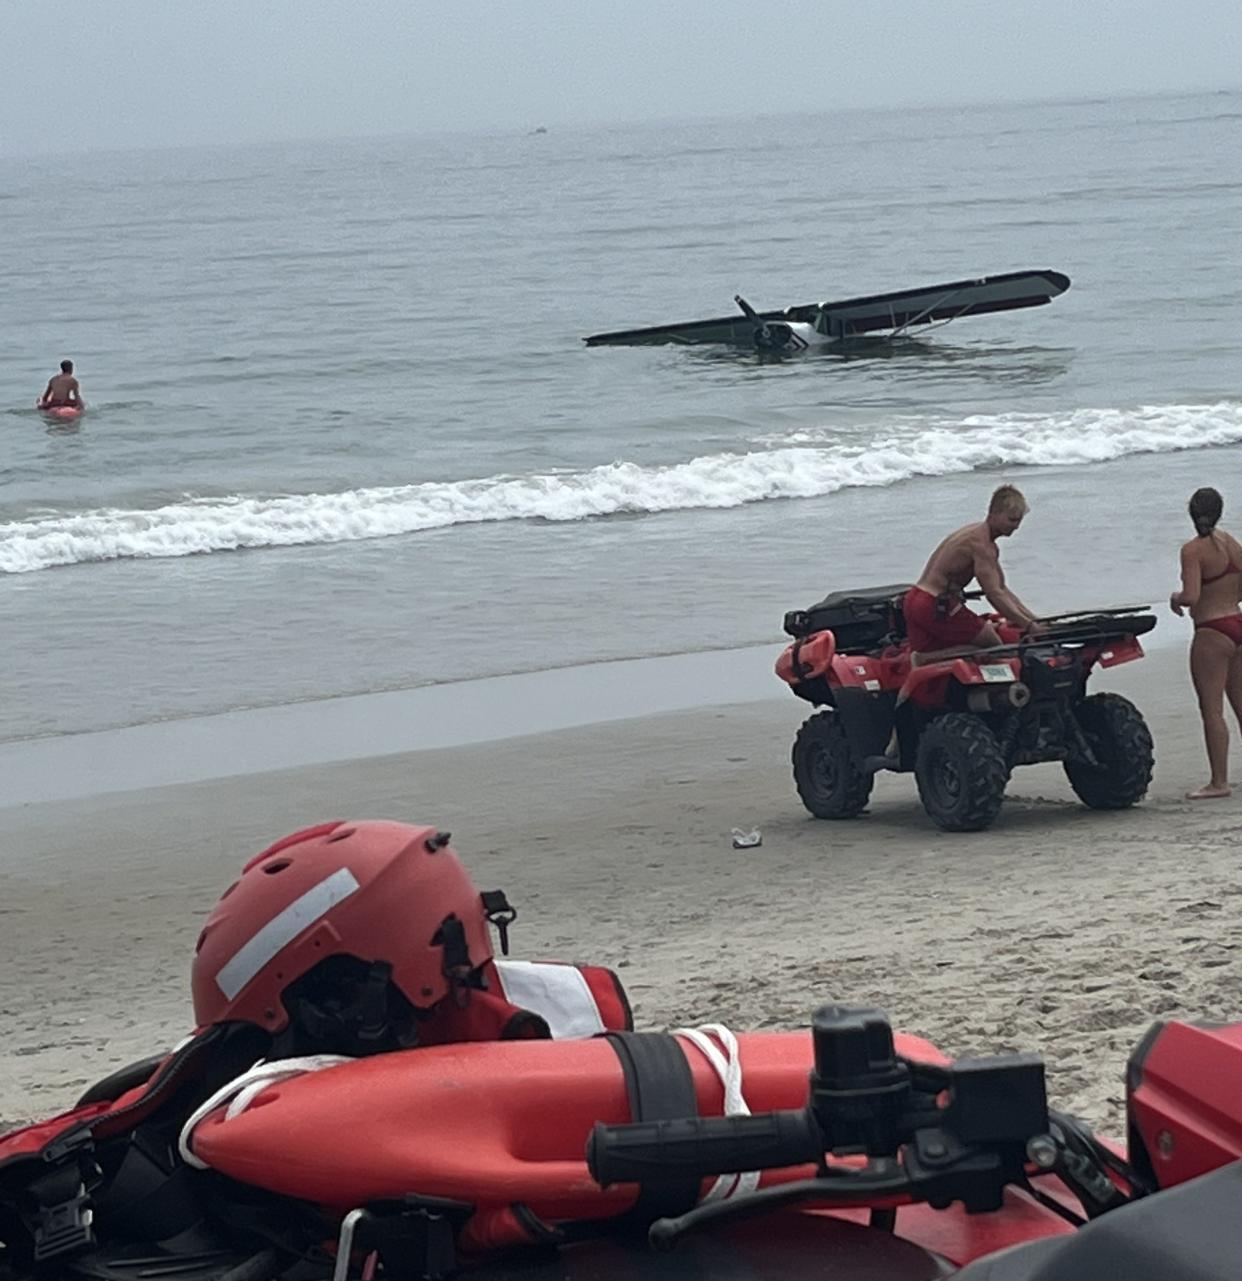 A small plane crashed into the ocean Saturday, July 29, around noon at Hampton Beach. Hampton Police Chief Alex Reno said the pilot is OK and was brought to shore by lifeguards.